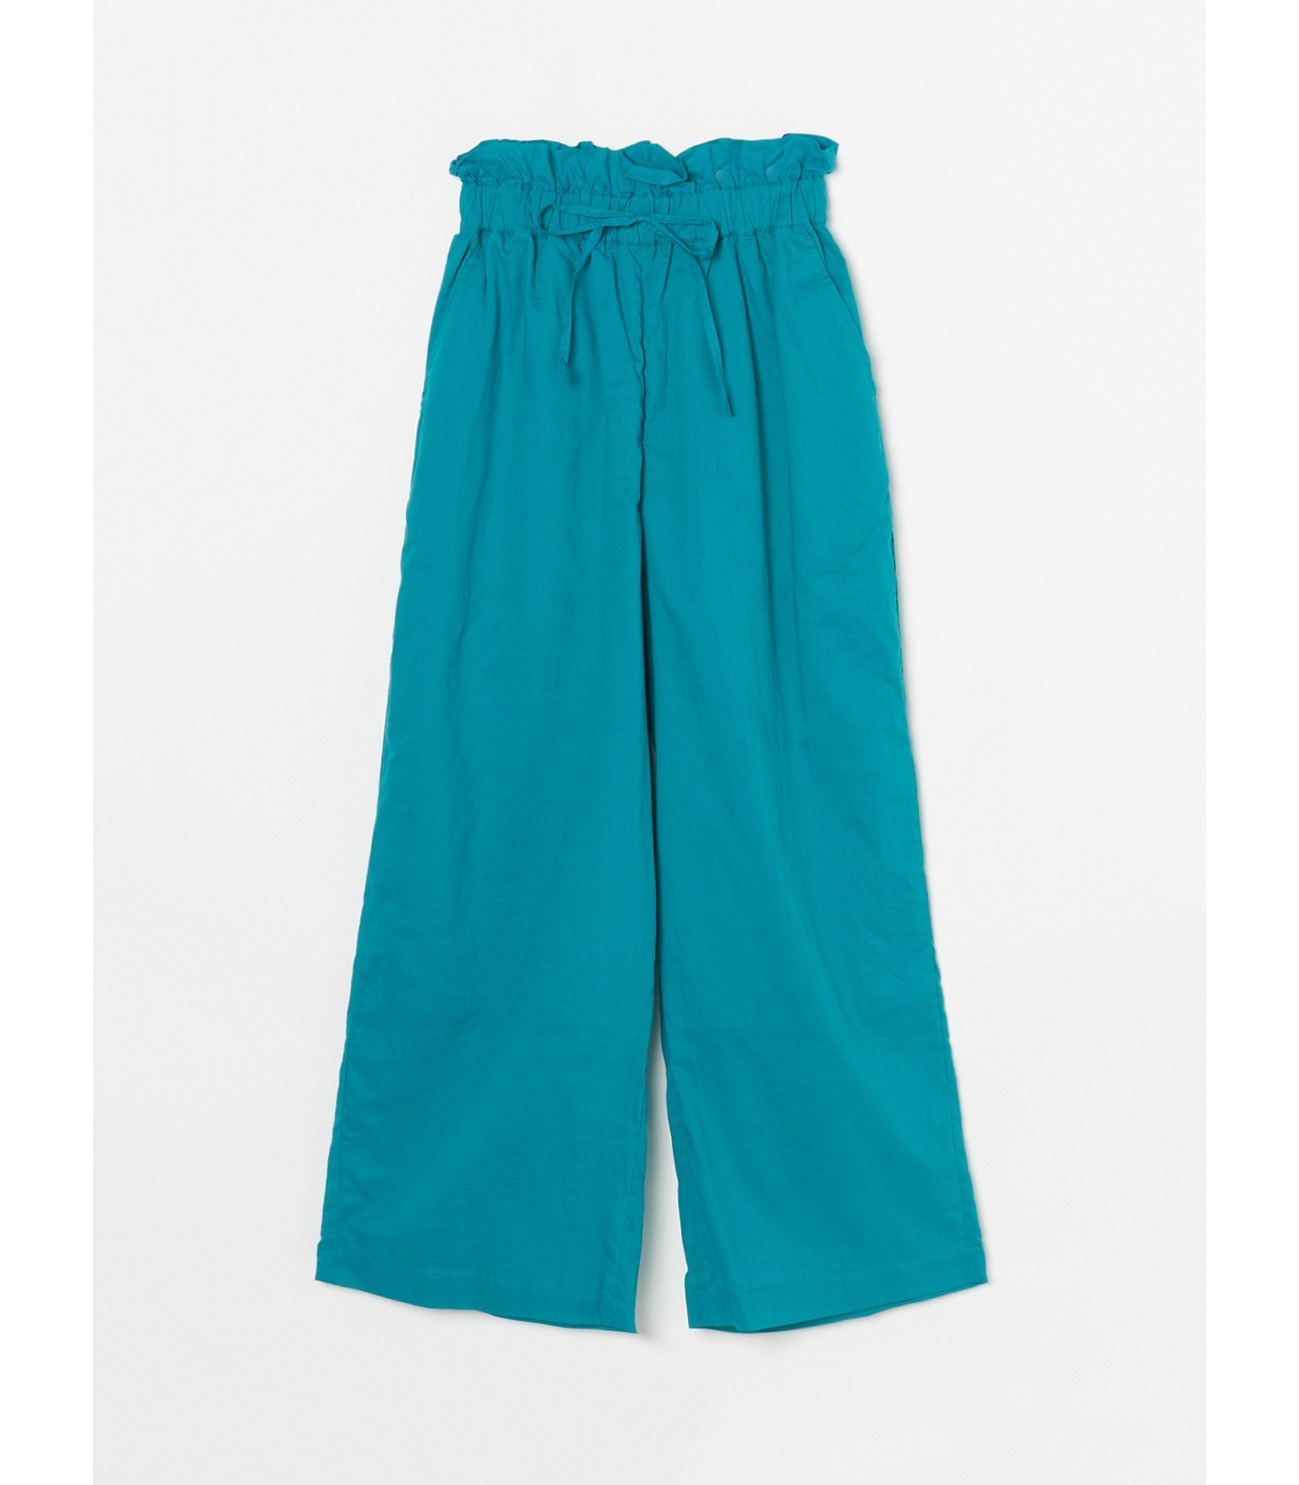 Cotton loan wide pant 詳細画像 turquoise 1